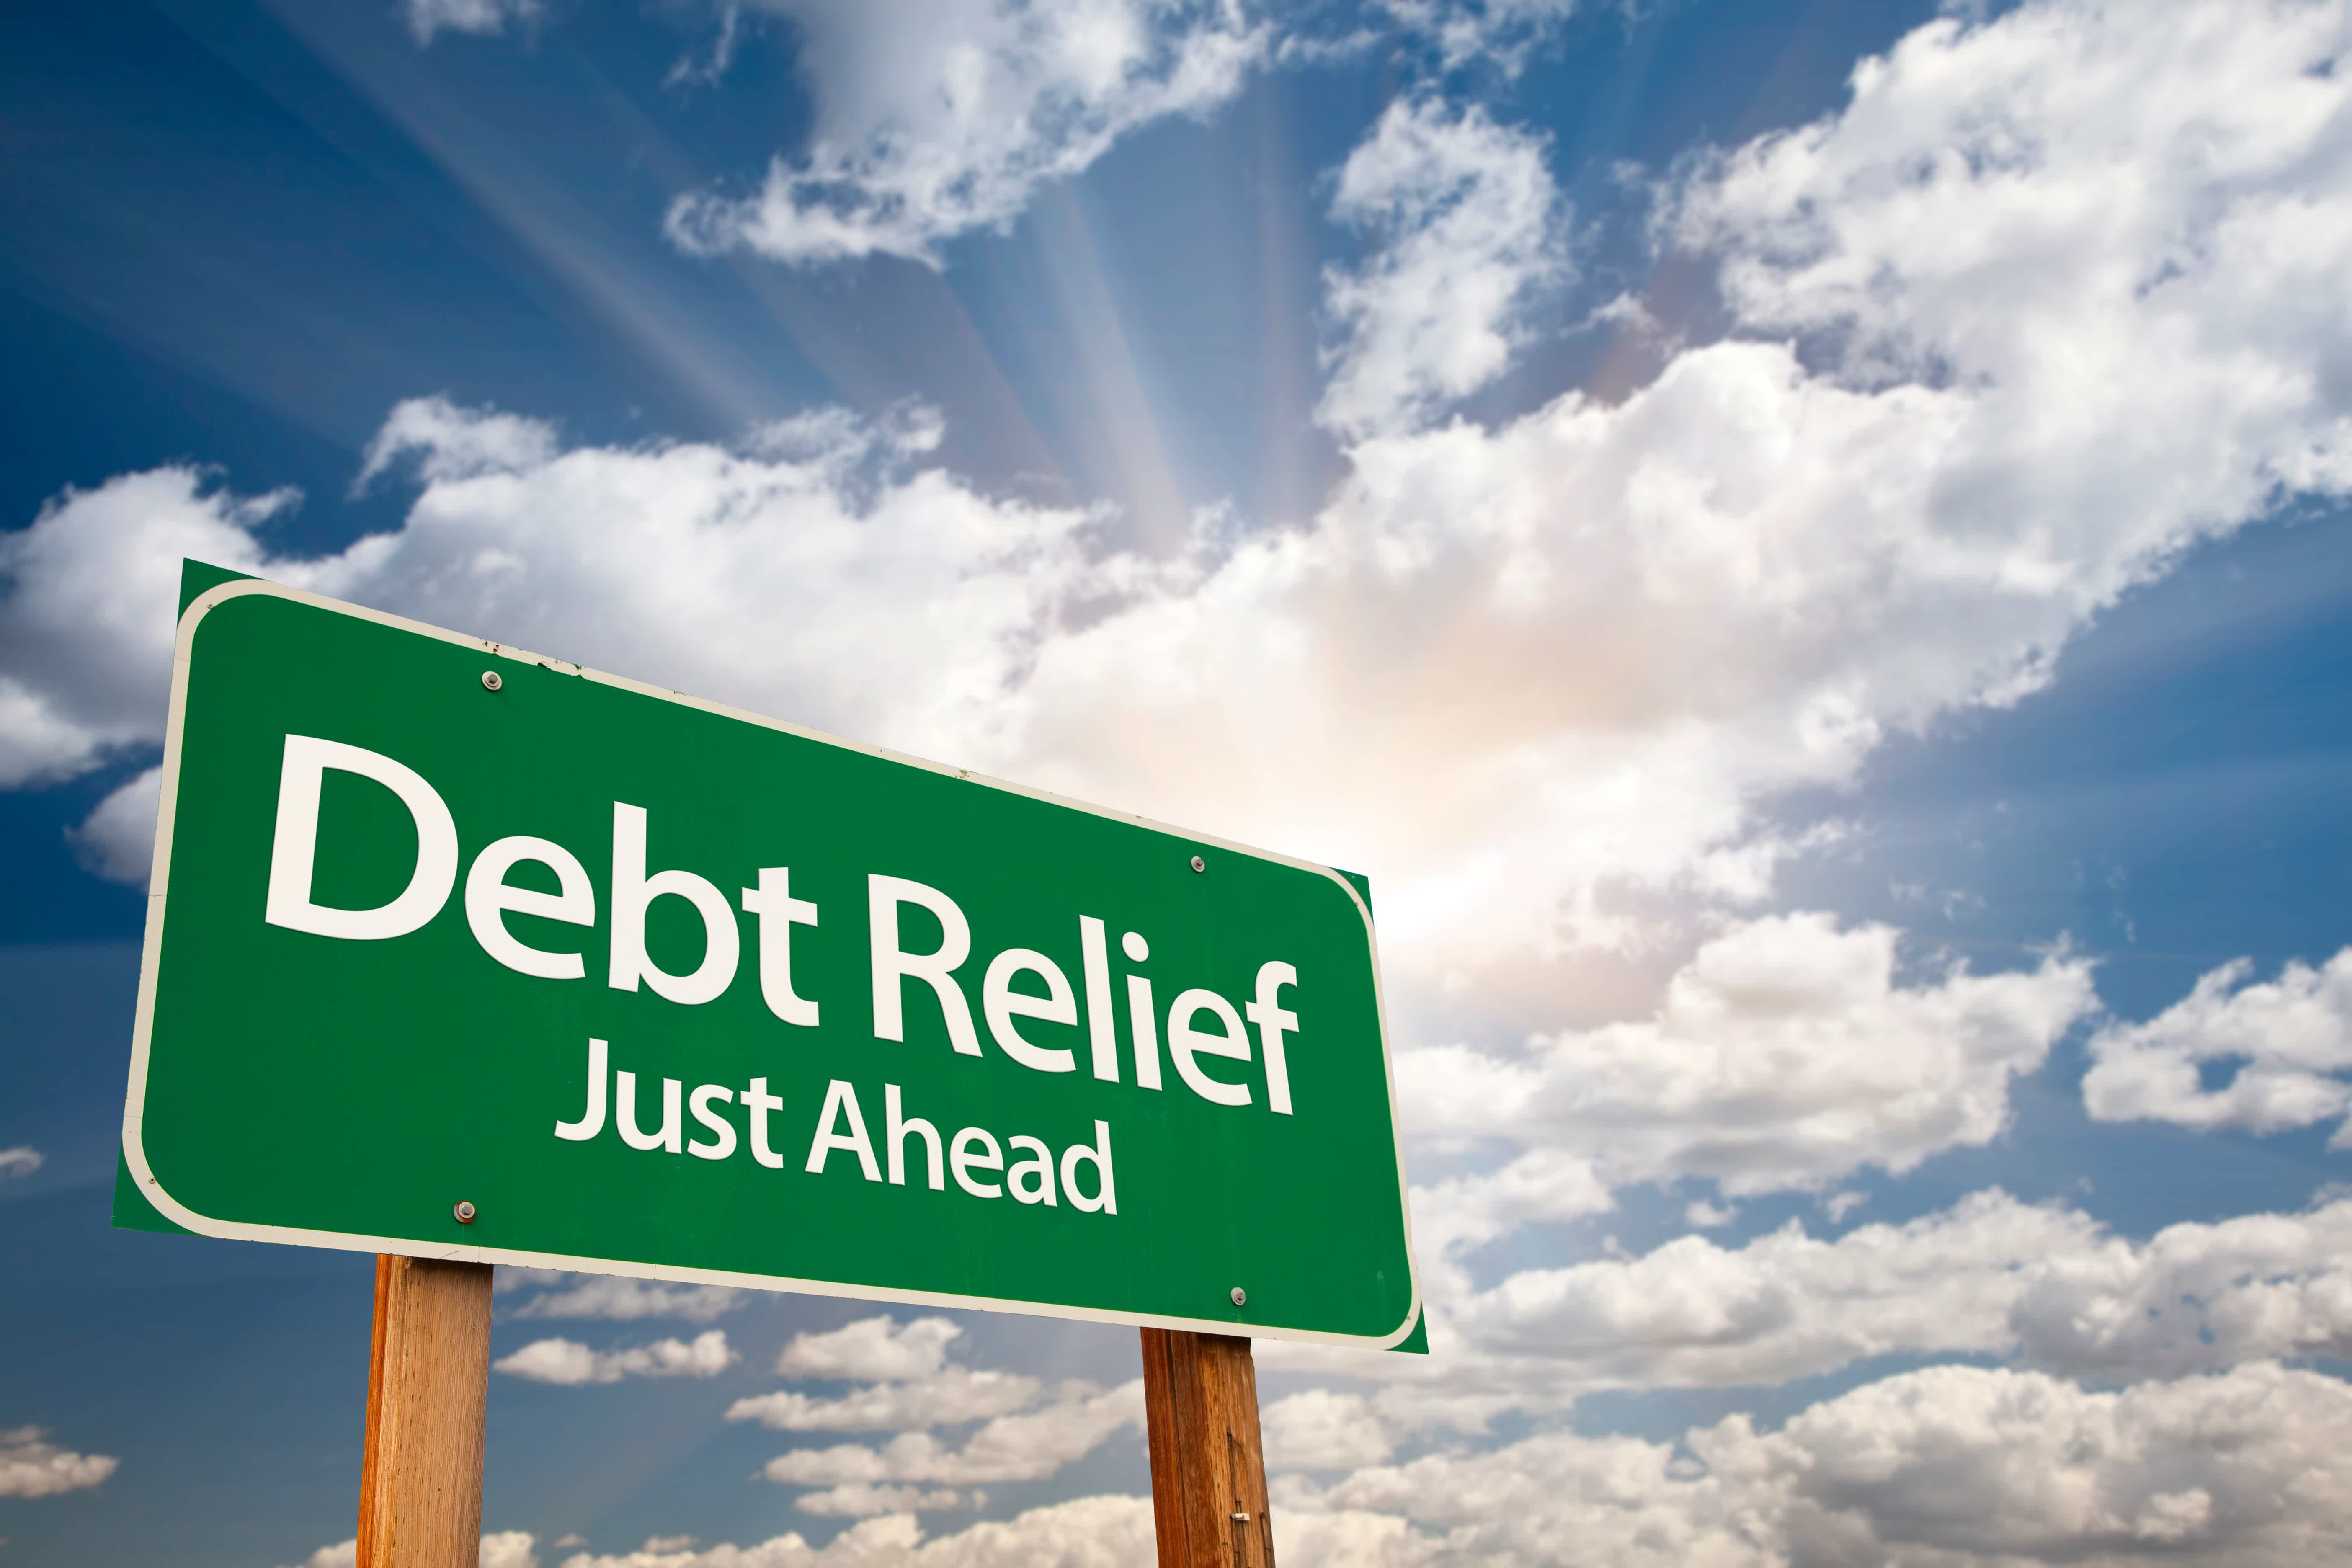 Get in touch with a professional to help you find debt relief. Source: Adobe Stock.